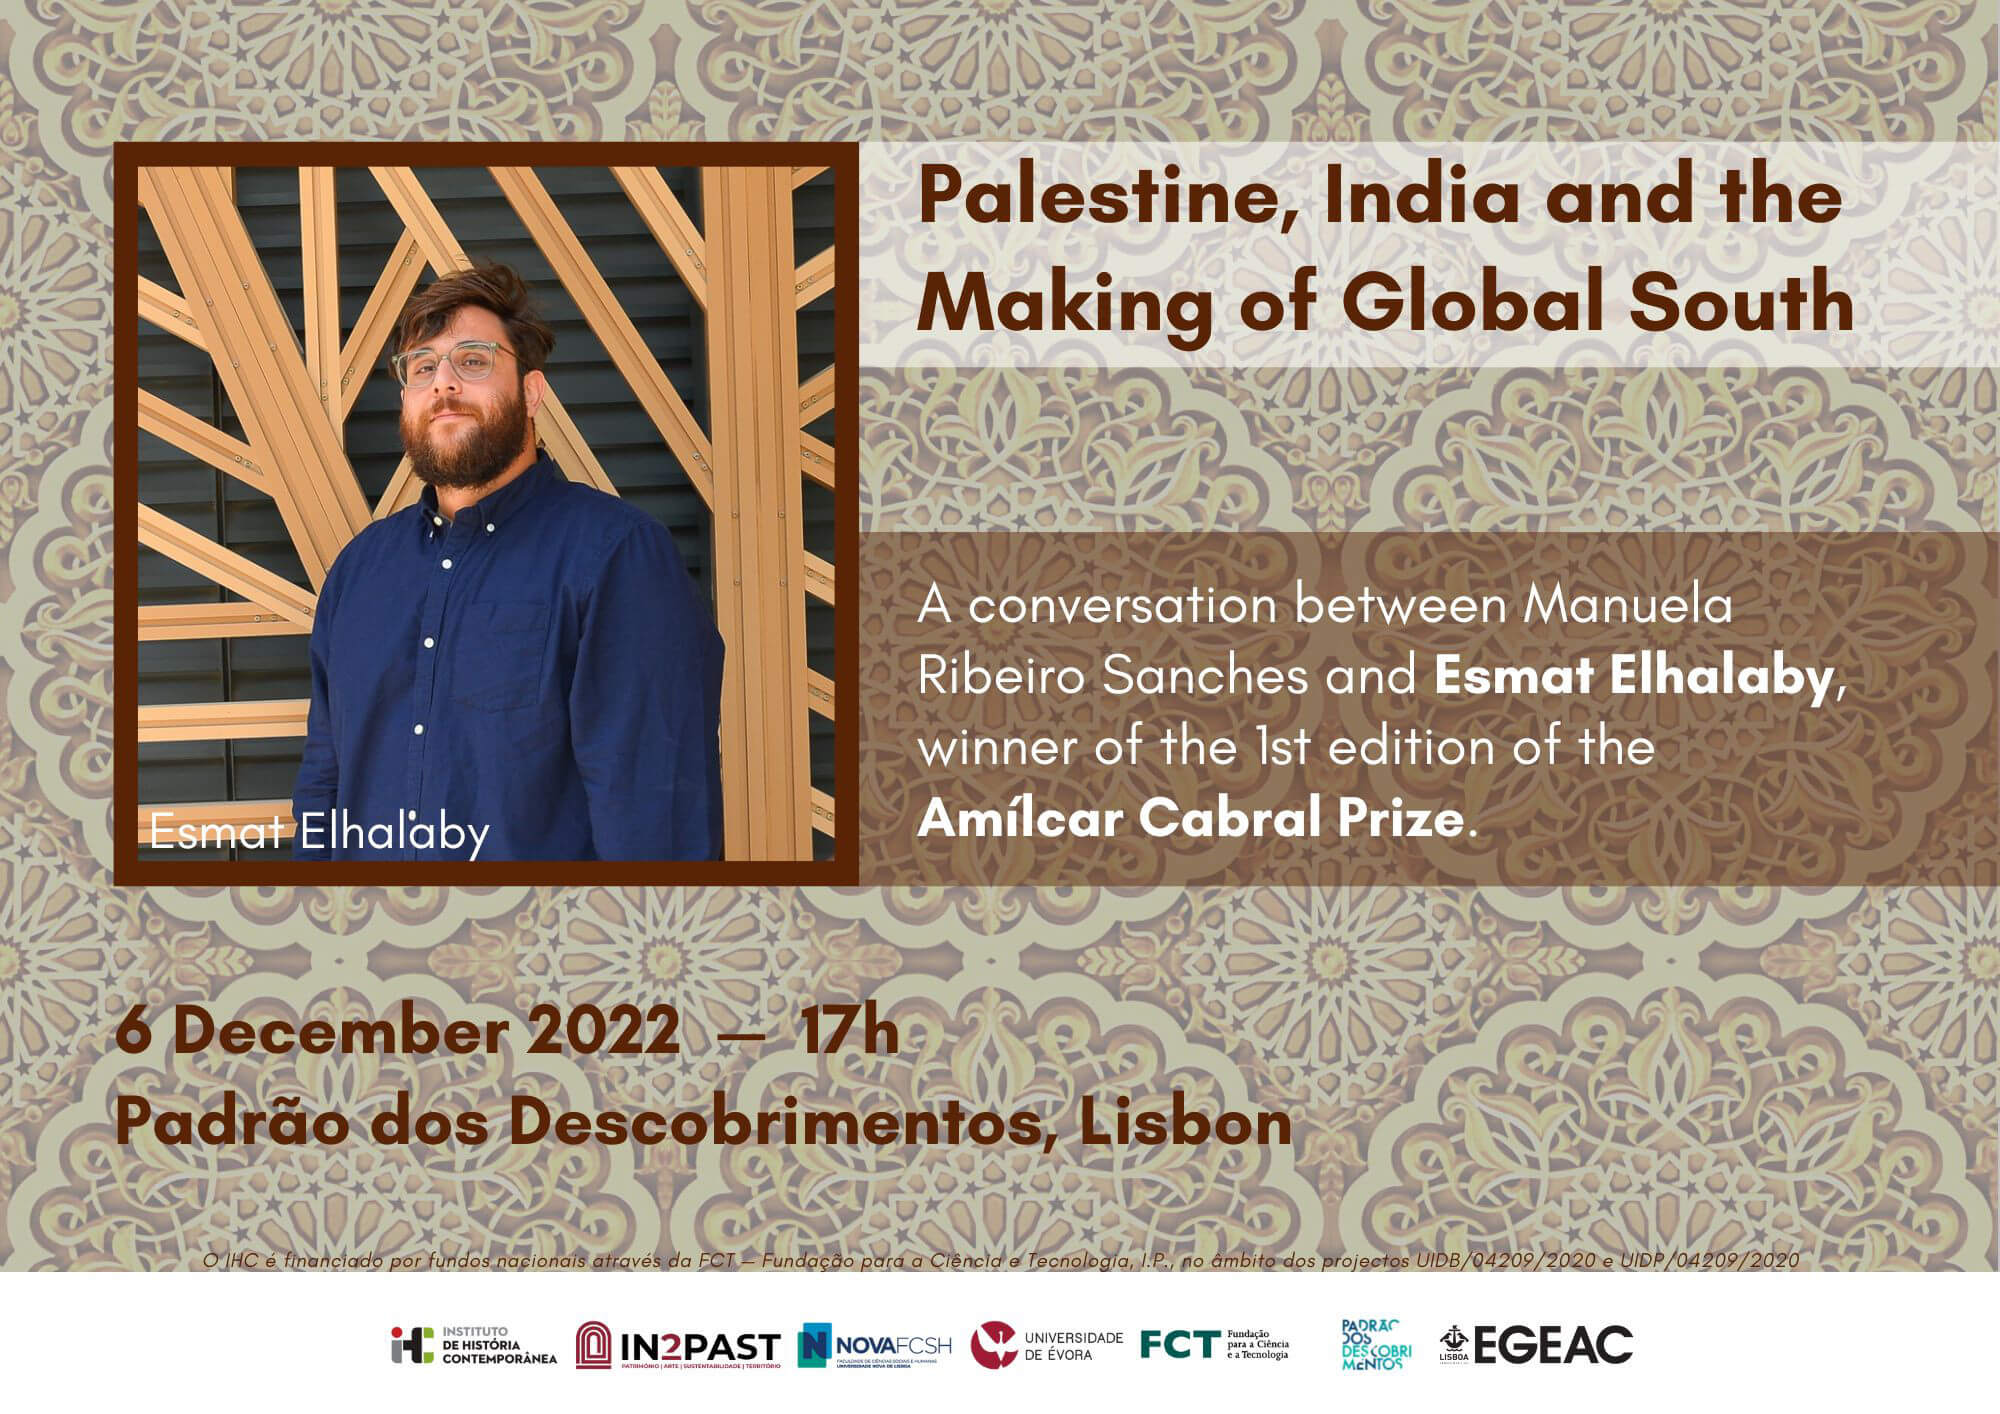 Poster for the conversation “Palestine, India and the Making of Global South, between Esmat Elhalaby and Manuela Ribeiro Sanches. It takes place on the sixth of December, at 5 PM, at the Monument of the Discoveries, in Lisbon, with free access. The poster includes a picture of Esmat Elhalaby.